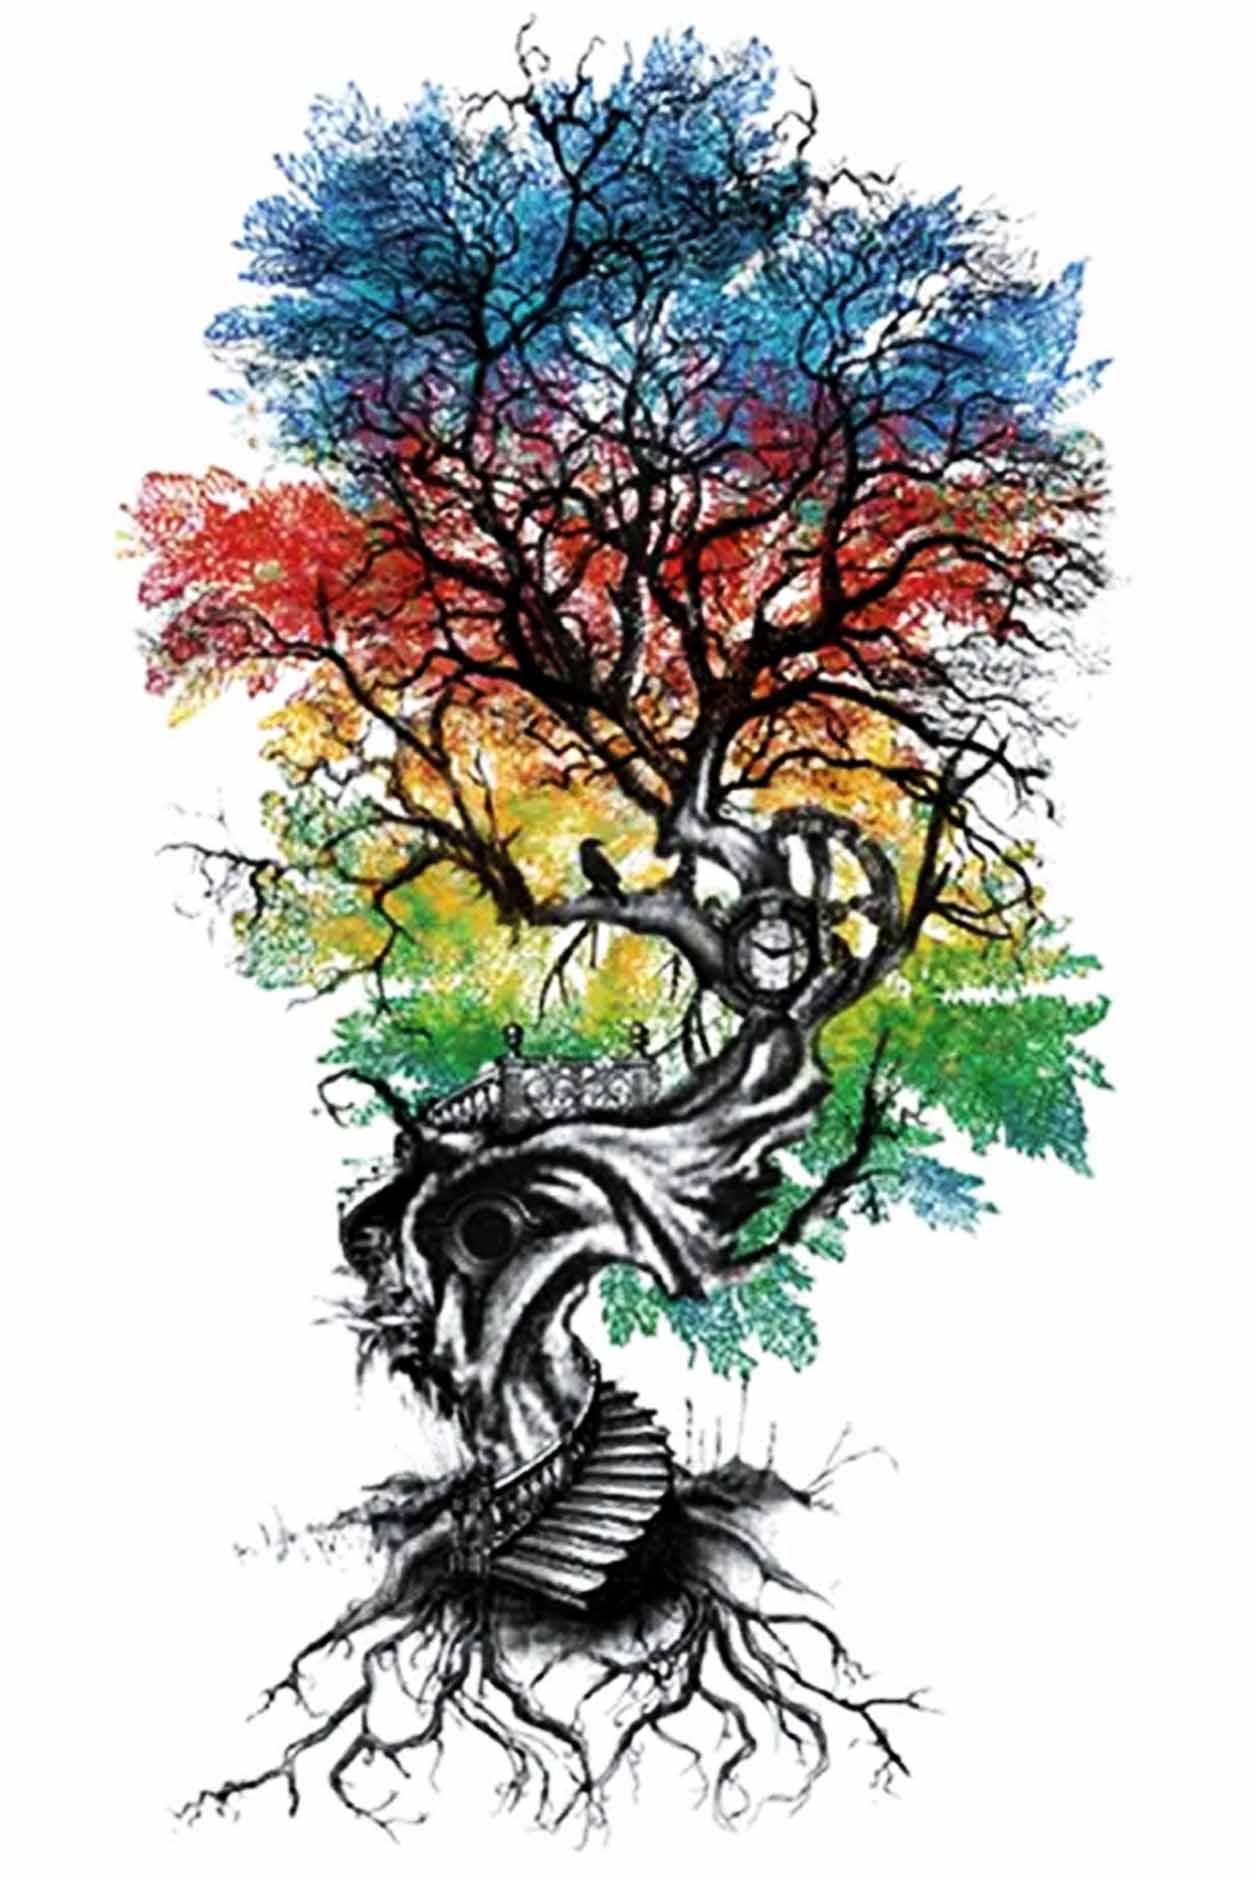 A mystical tree of life has a built-in bridge or stairway to heaven. A crow guards the path that pushes past a clock in the middle of the tree. The leaves are magical in blue, pink, gold, and shades of green. Roots of the tree are proudly displayed.